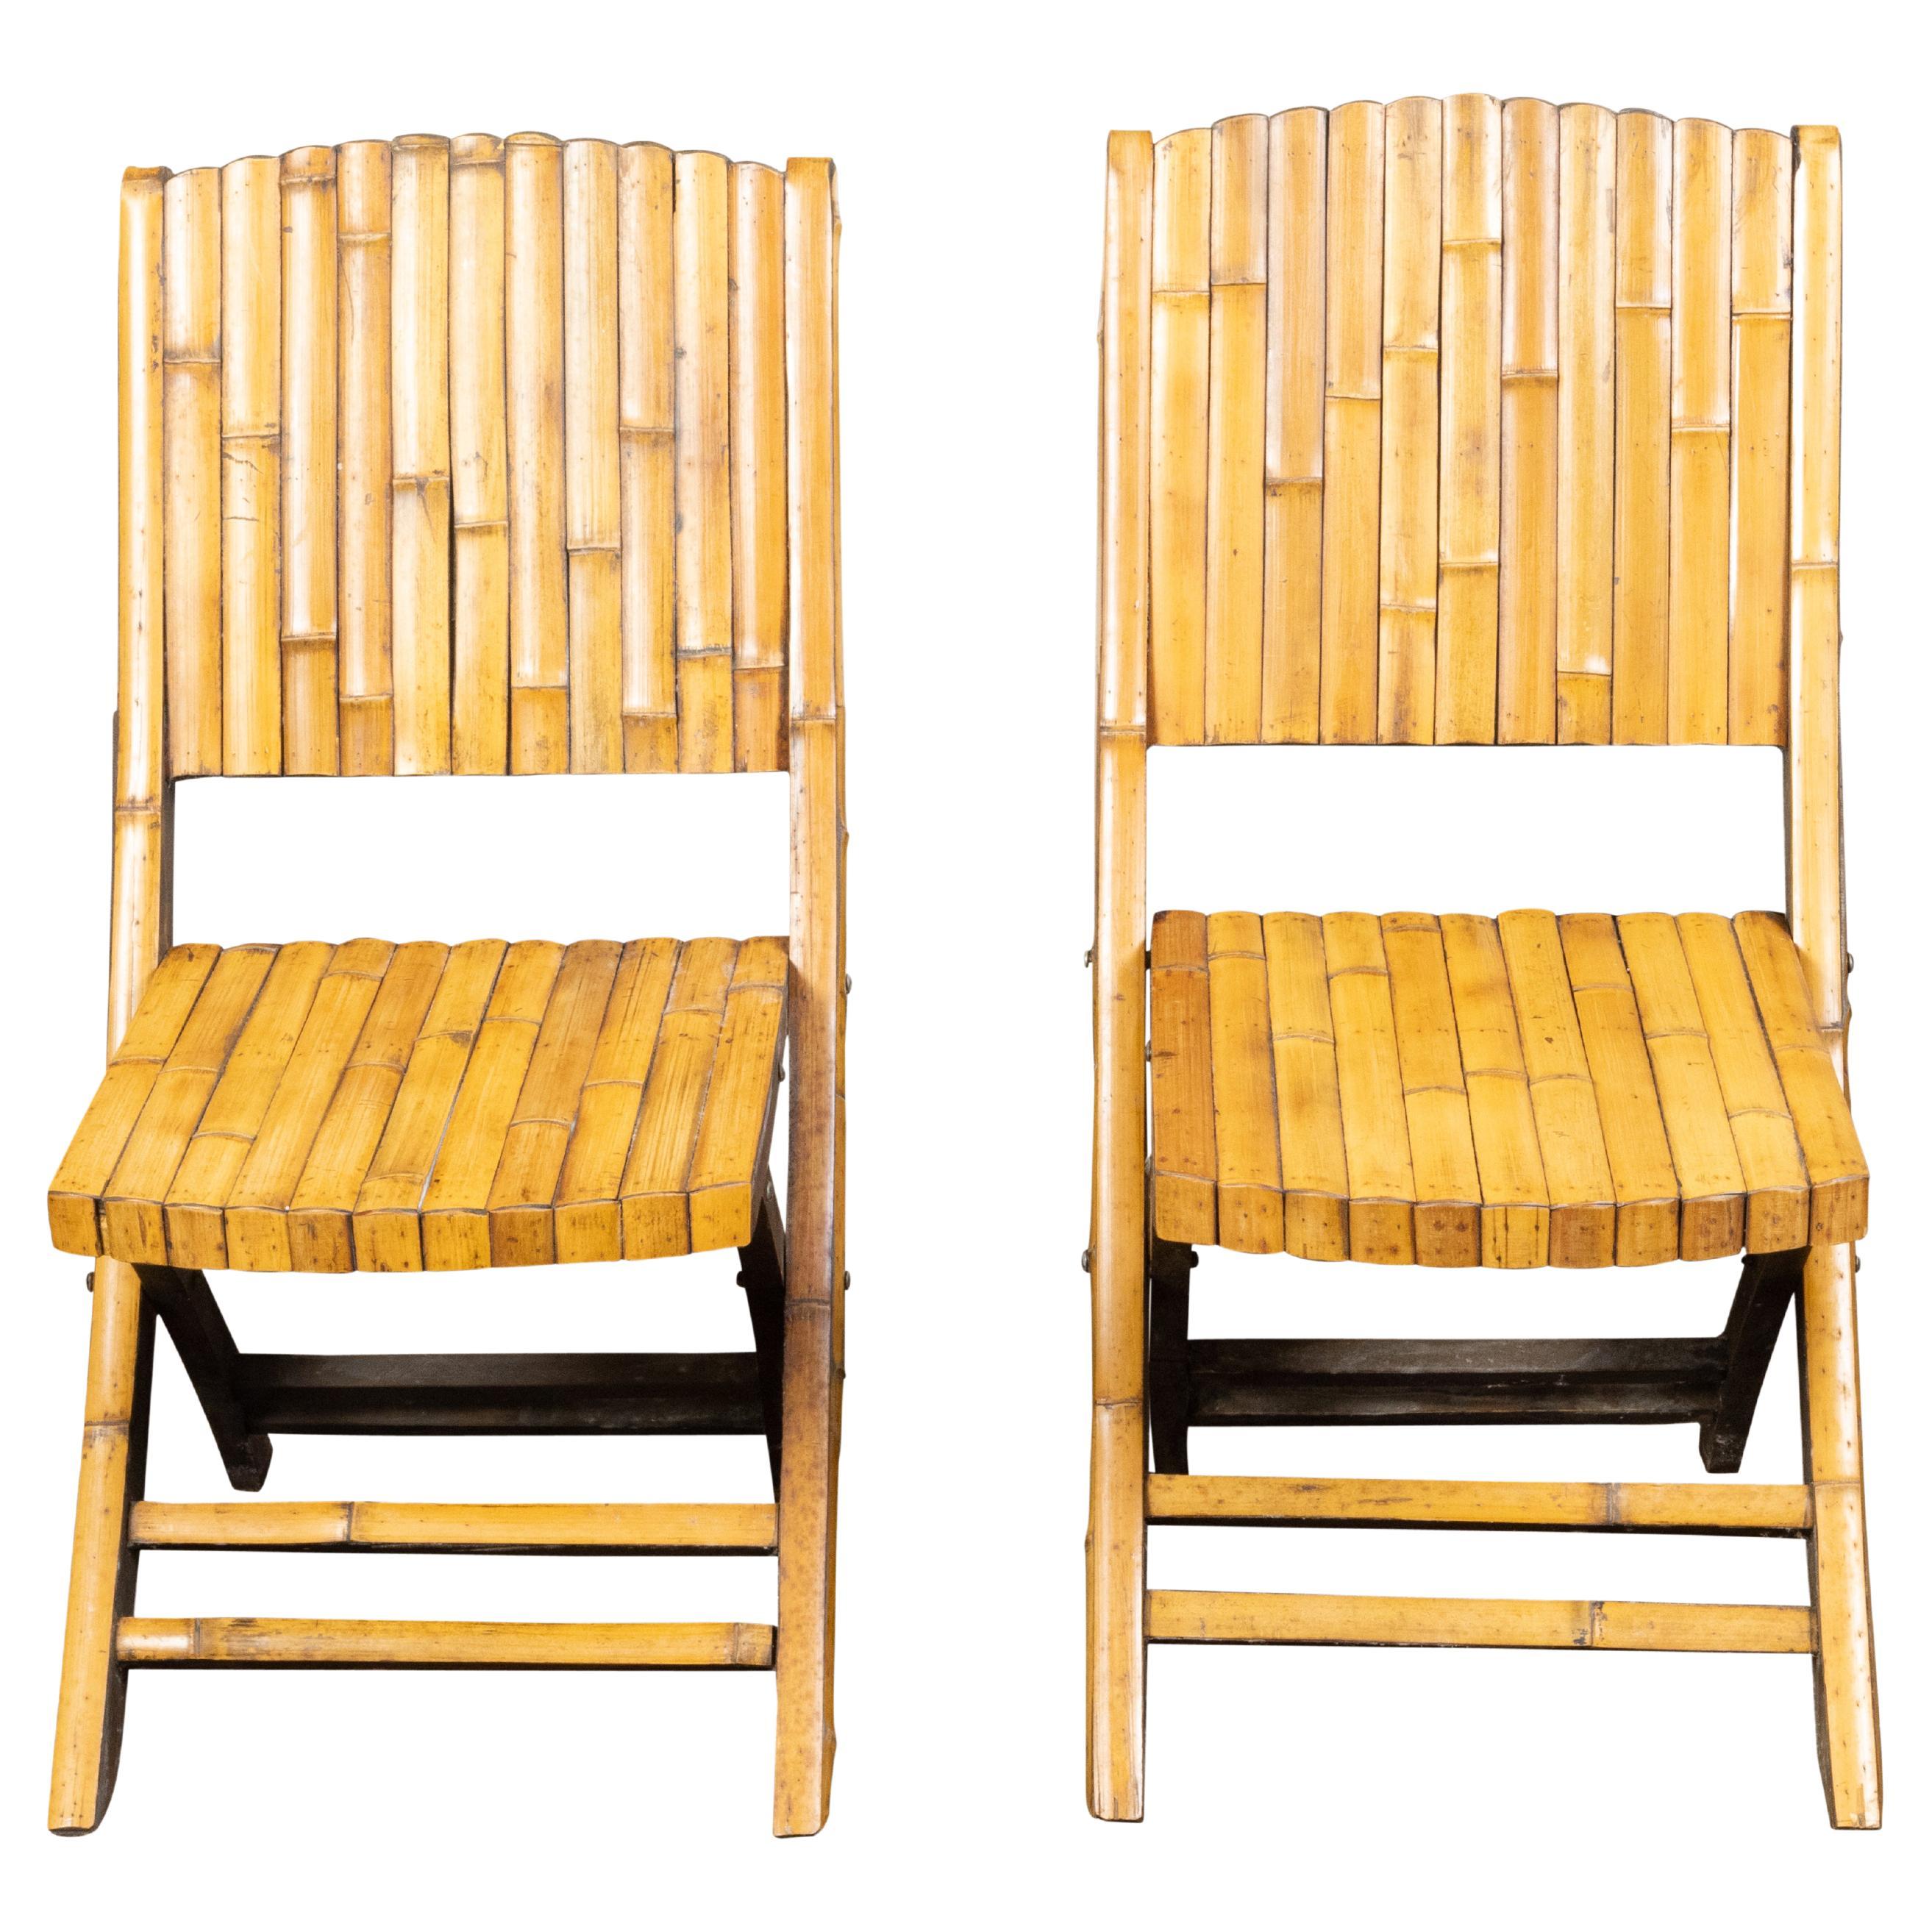 Midcentury Sculptural Bamboo Chair For Sale at 1stDibs | mid